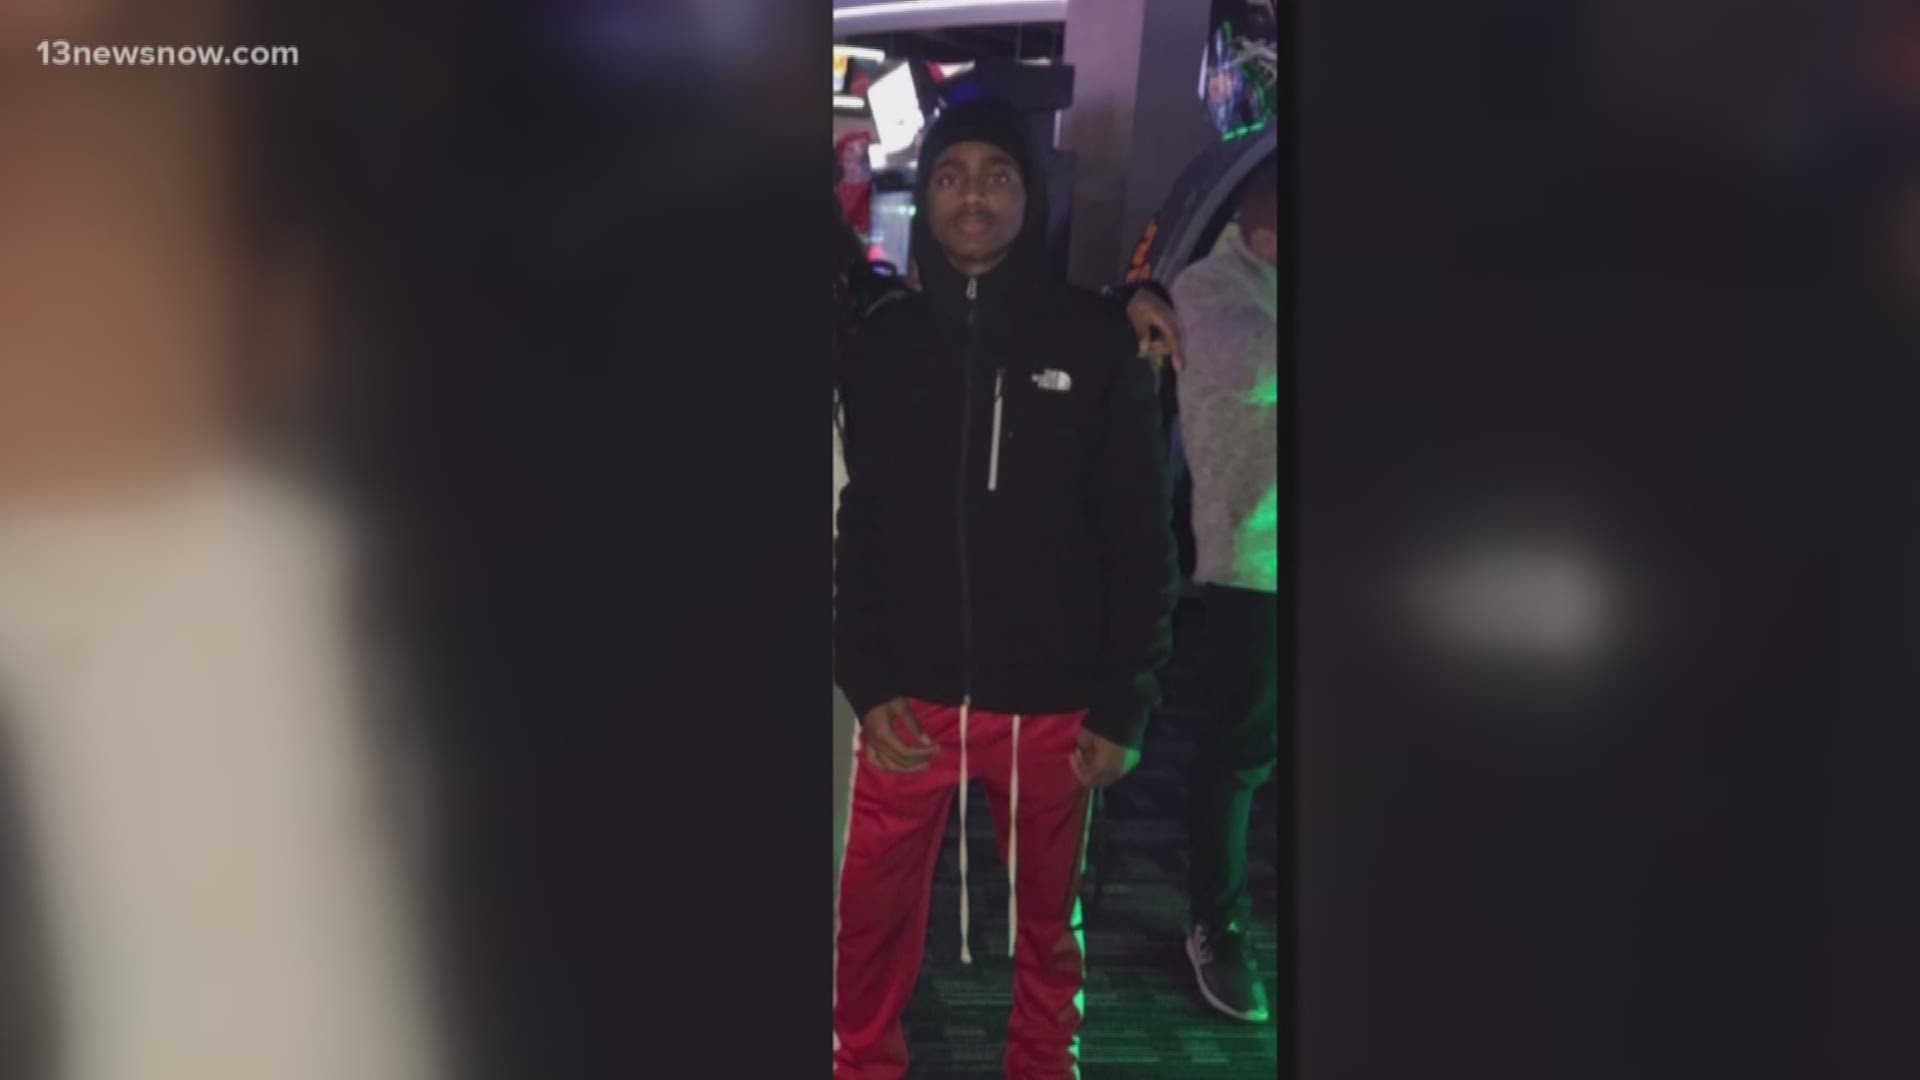 Rae'kwon Peterson, 17, was shot and killed outside a 7-Eleven in Hampton. Police said the shooter is still on the loose.